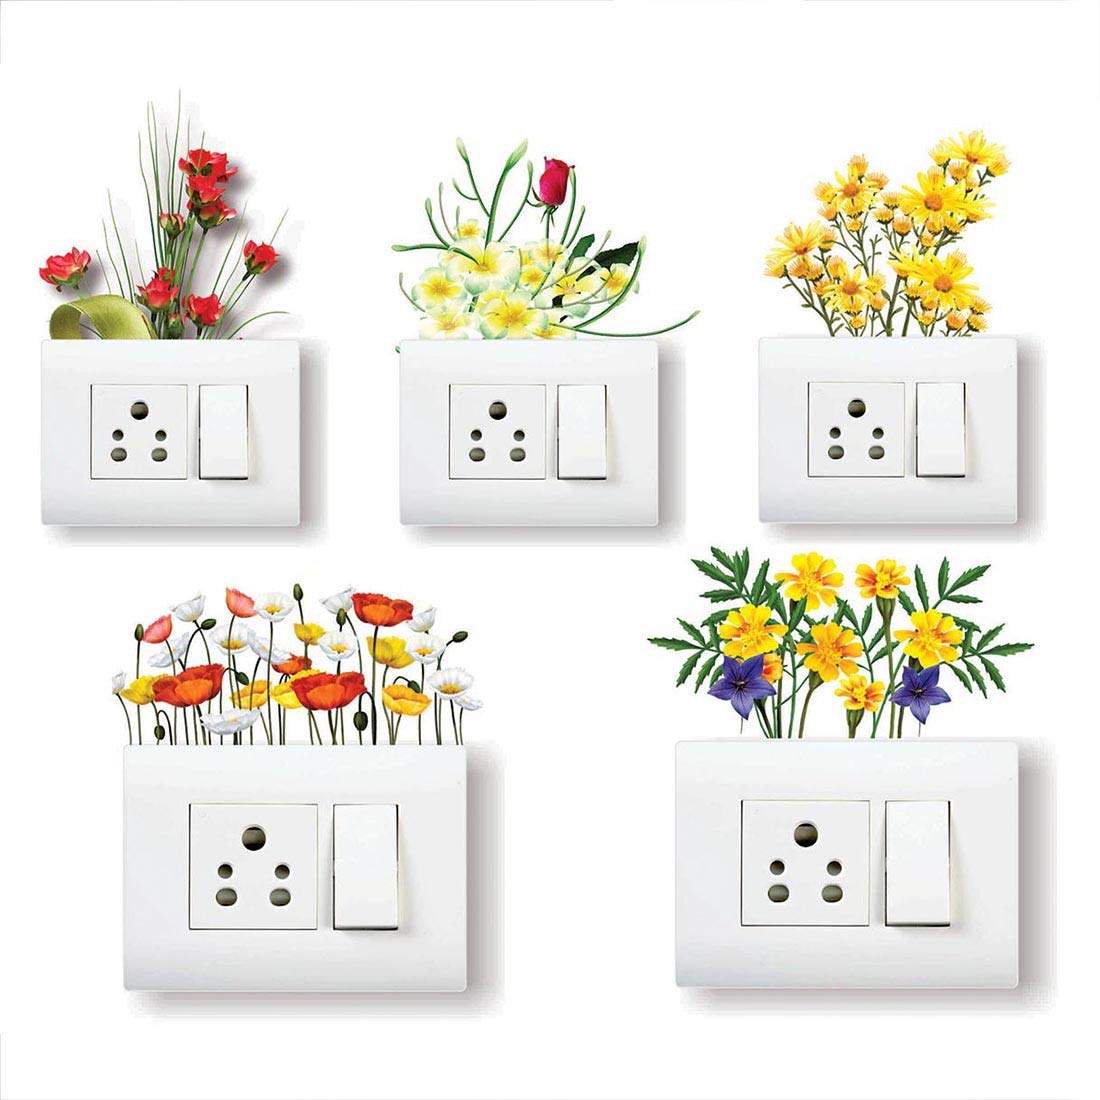 Best Switchboard Stickers For Home In India Business Insider India